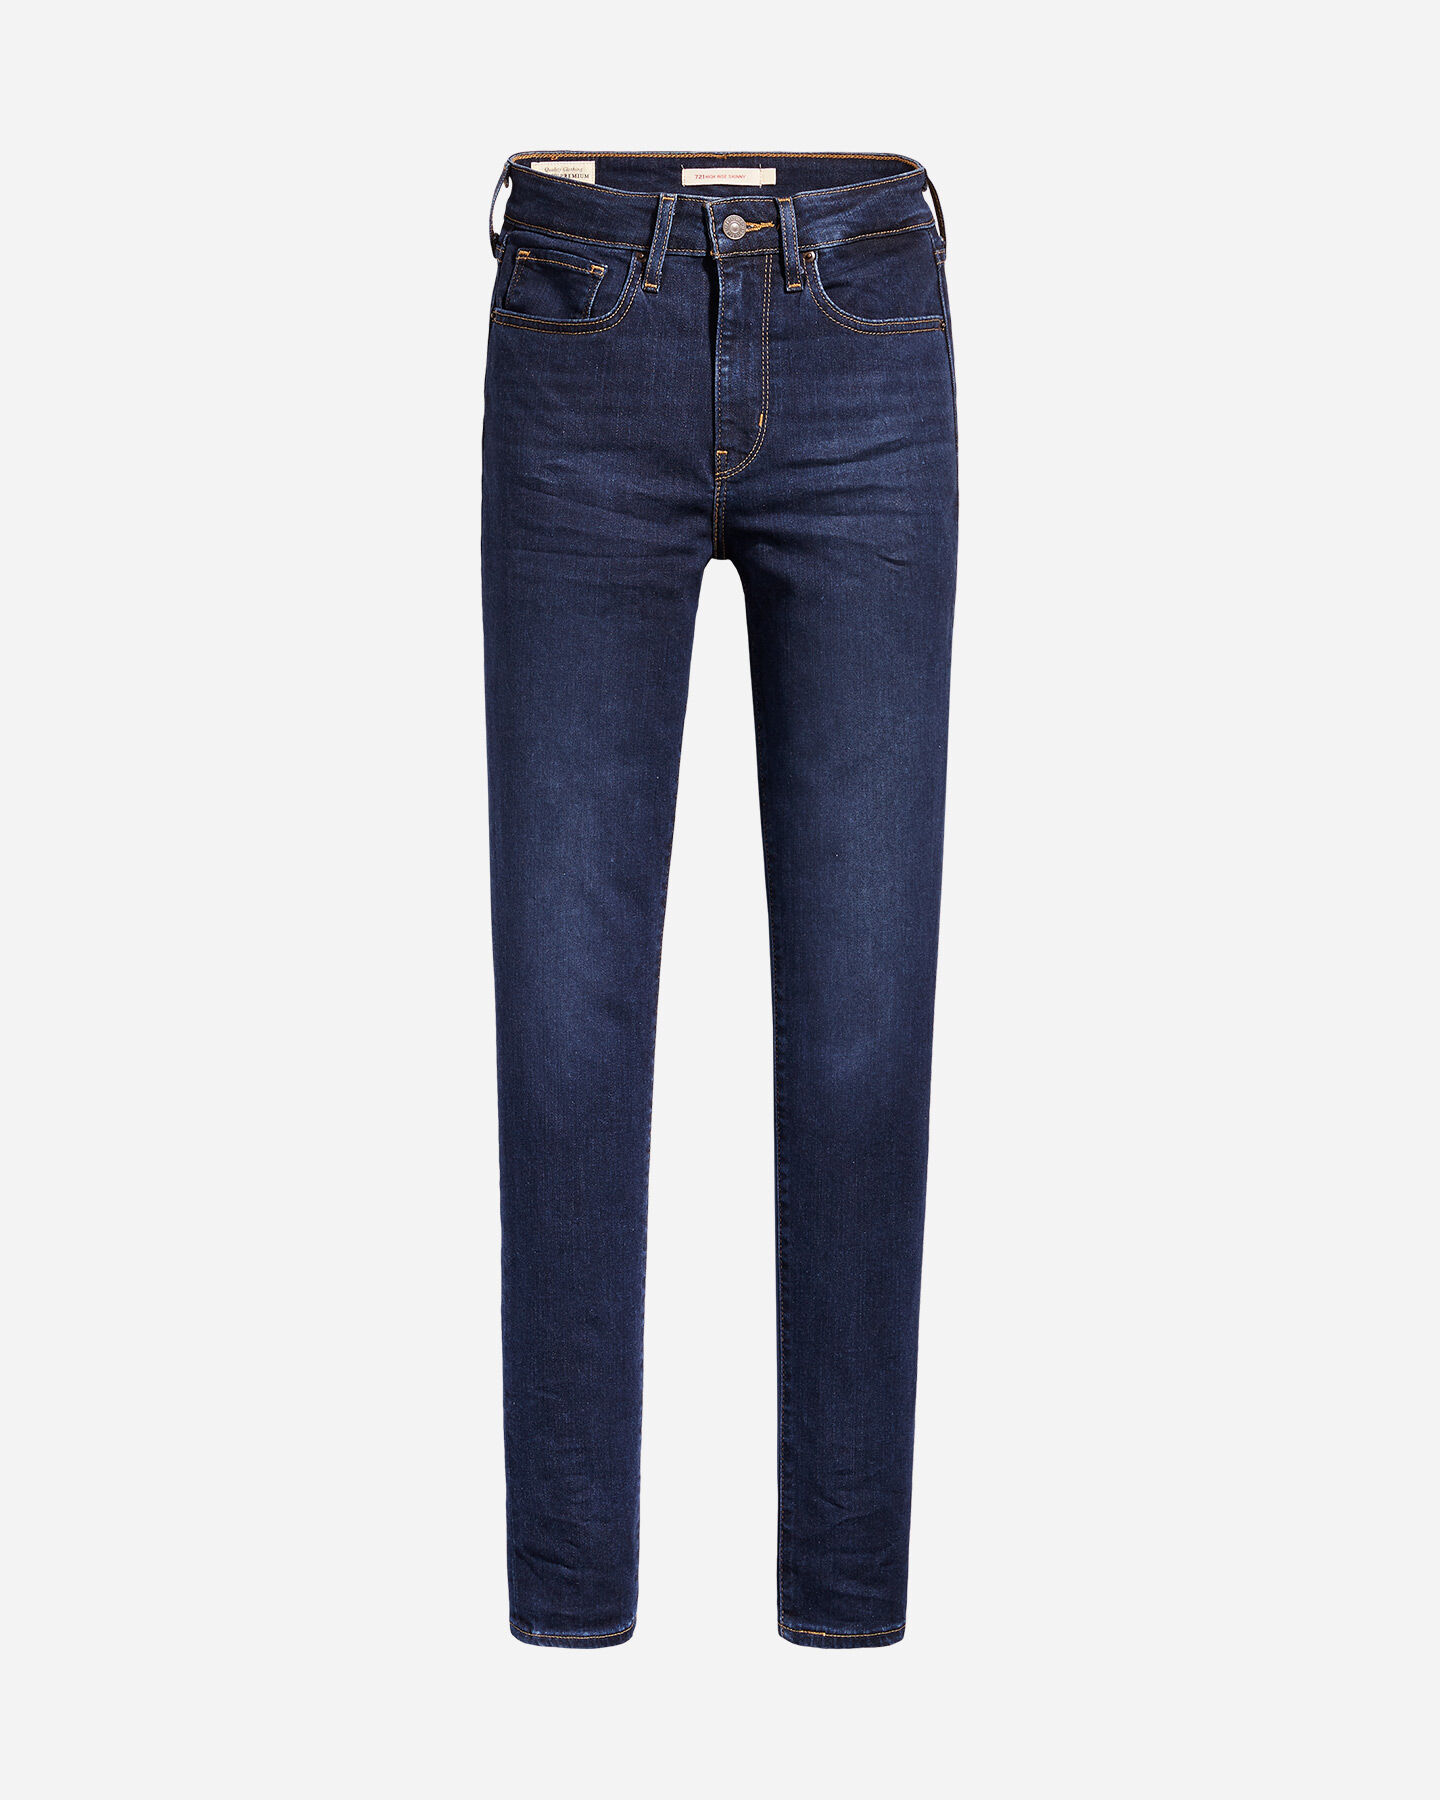  Jeans LEVI'S 721 HIGH RISE SKINNY  W S4097258|0362|26 scatto 4